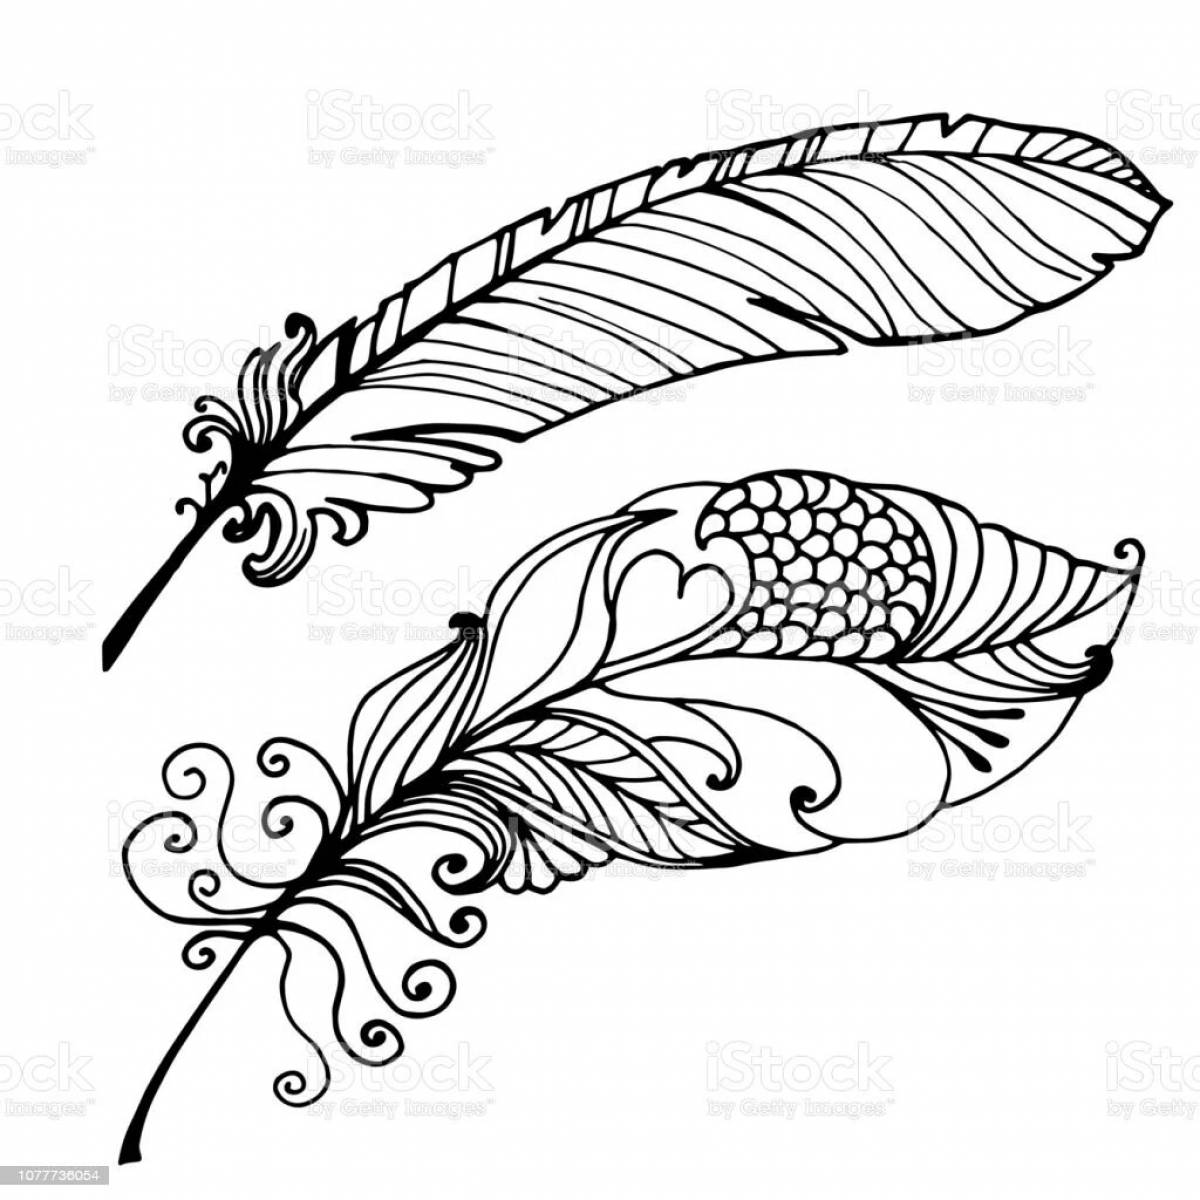 Amazing coloring pages with firebird feathers for kids